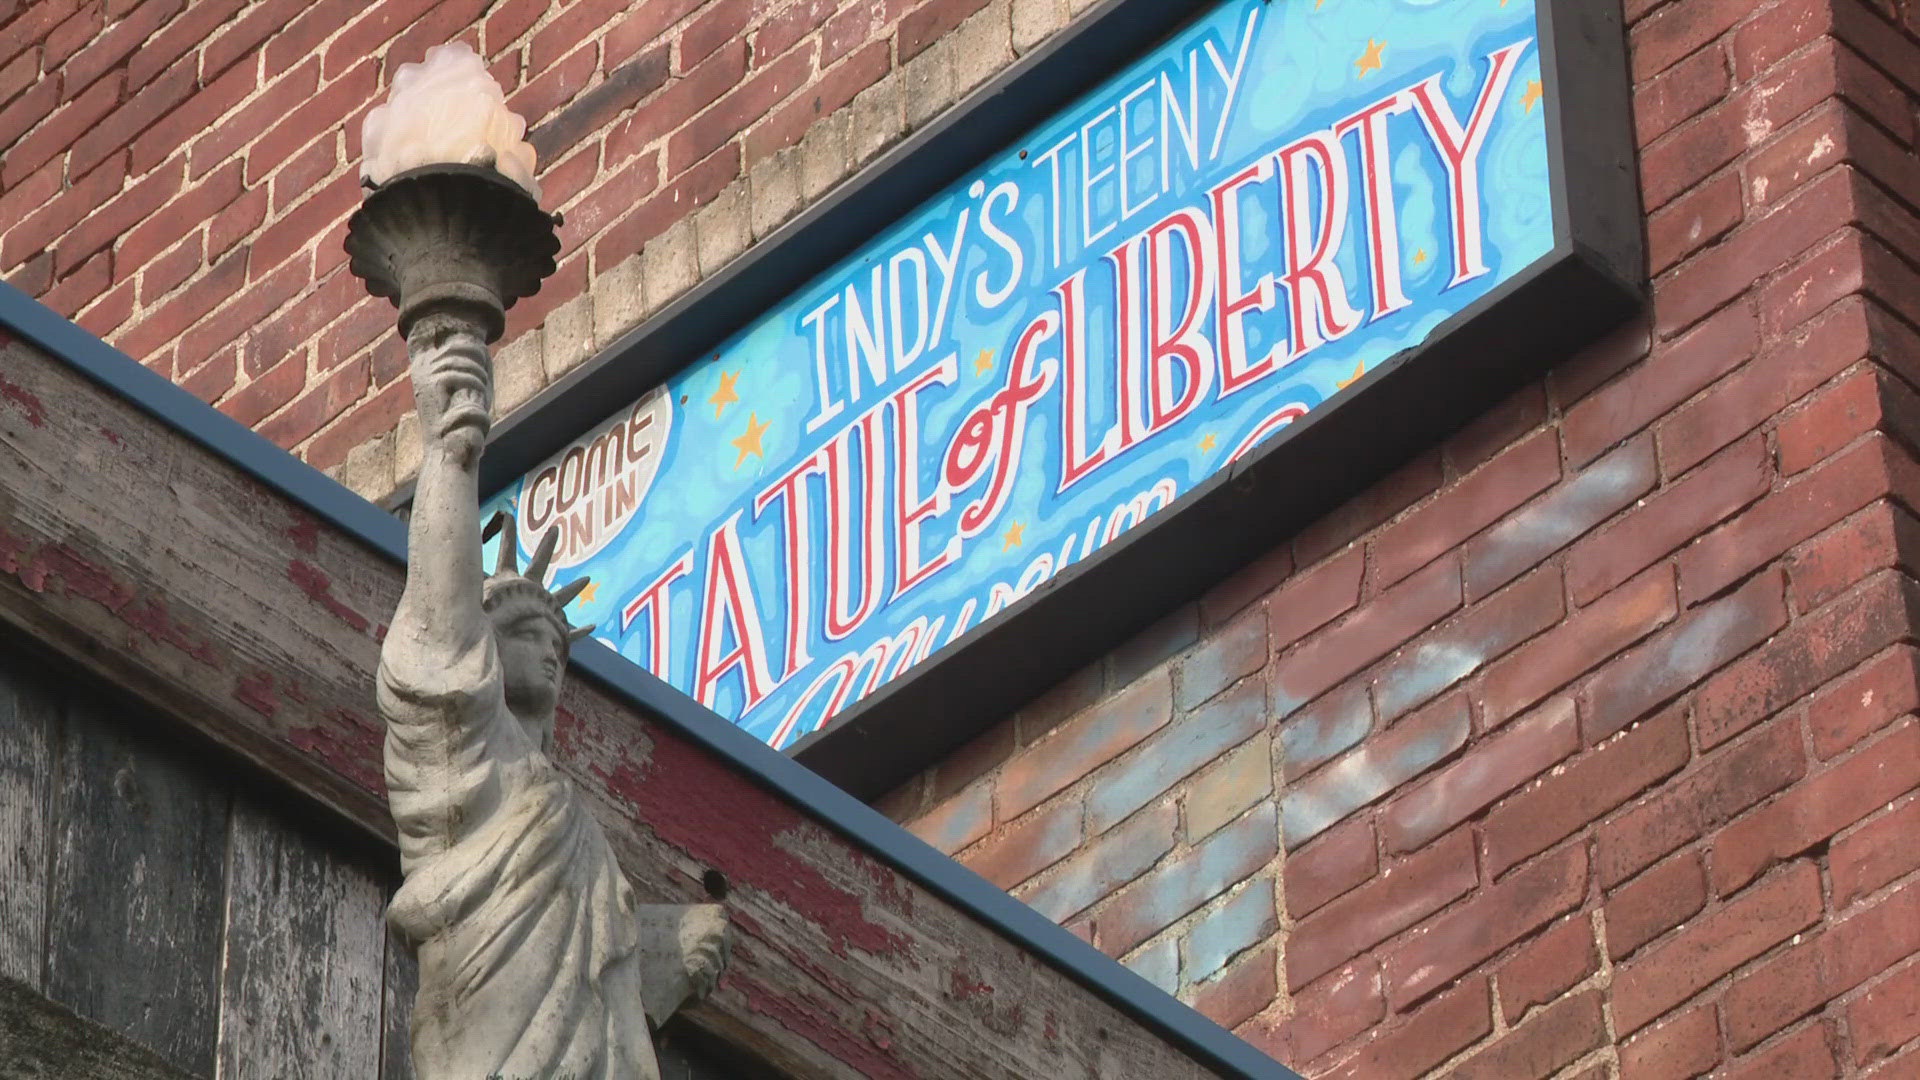 Did you know there's a museum celebrating the Statue of Liberty right here in Indianapolis?